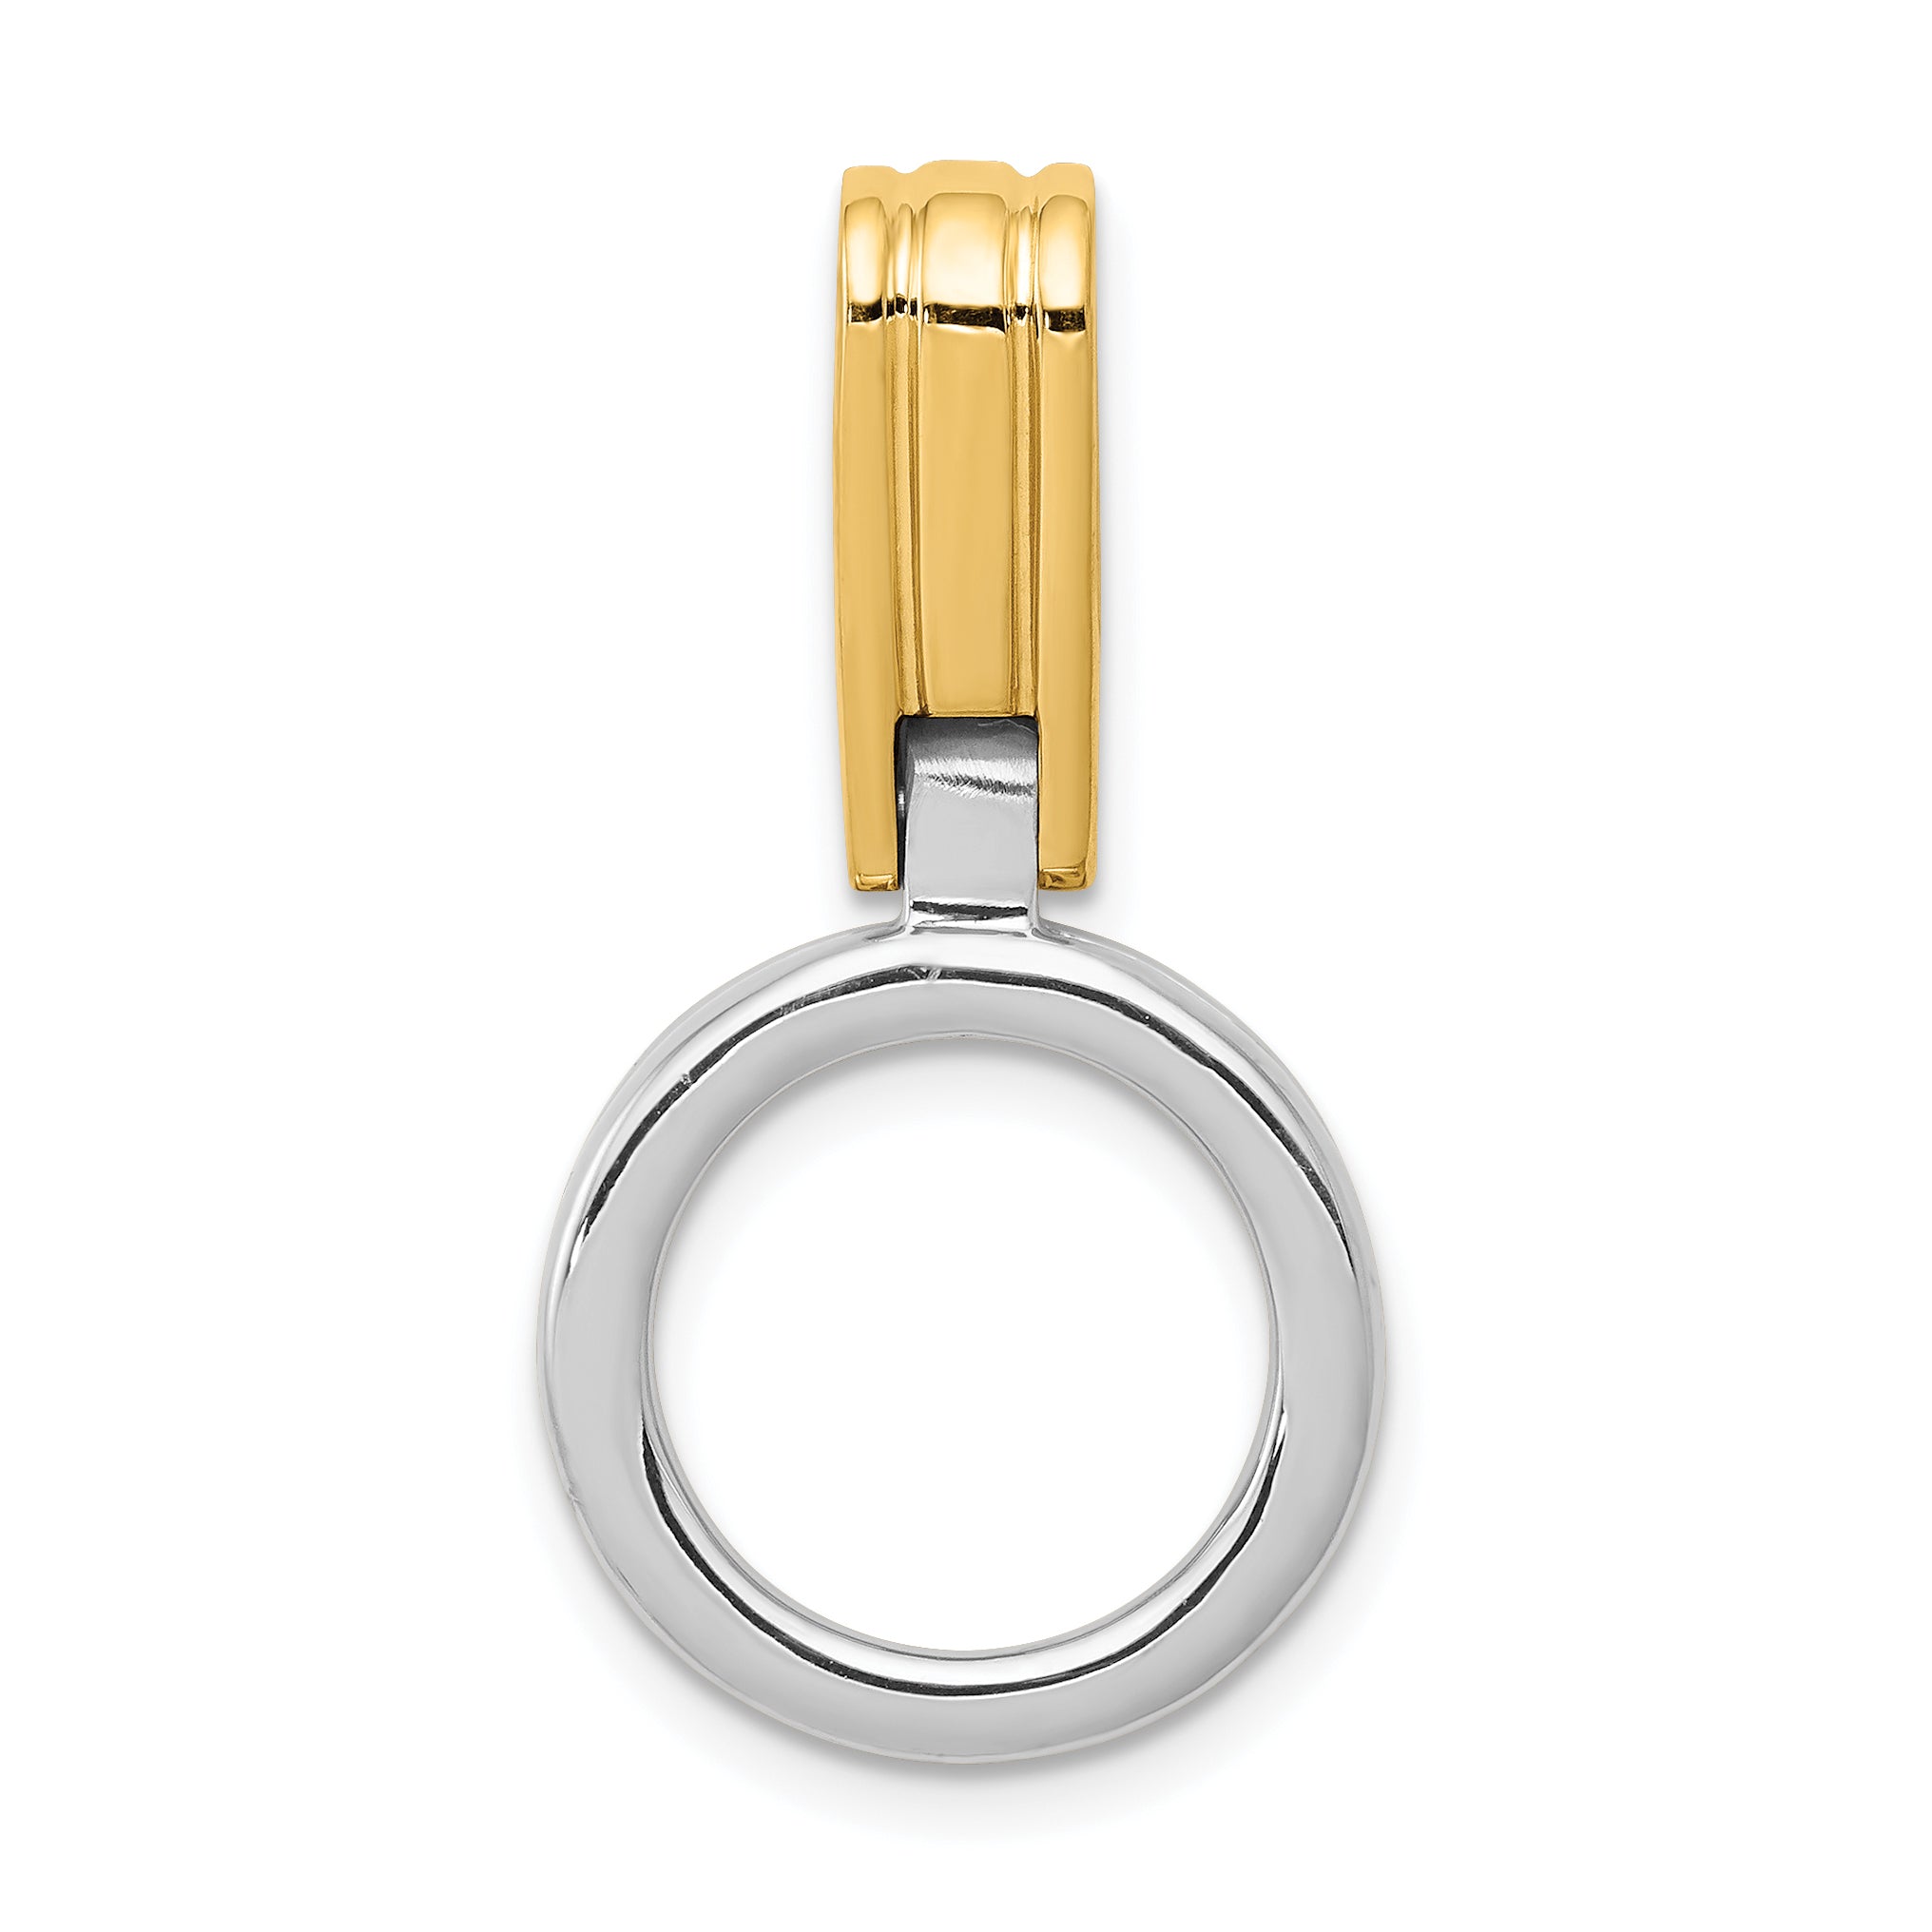 14k Two-tone Fits up to 3mm, 6mm Reversible Omega Slide